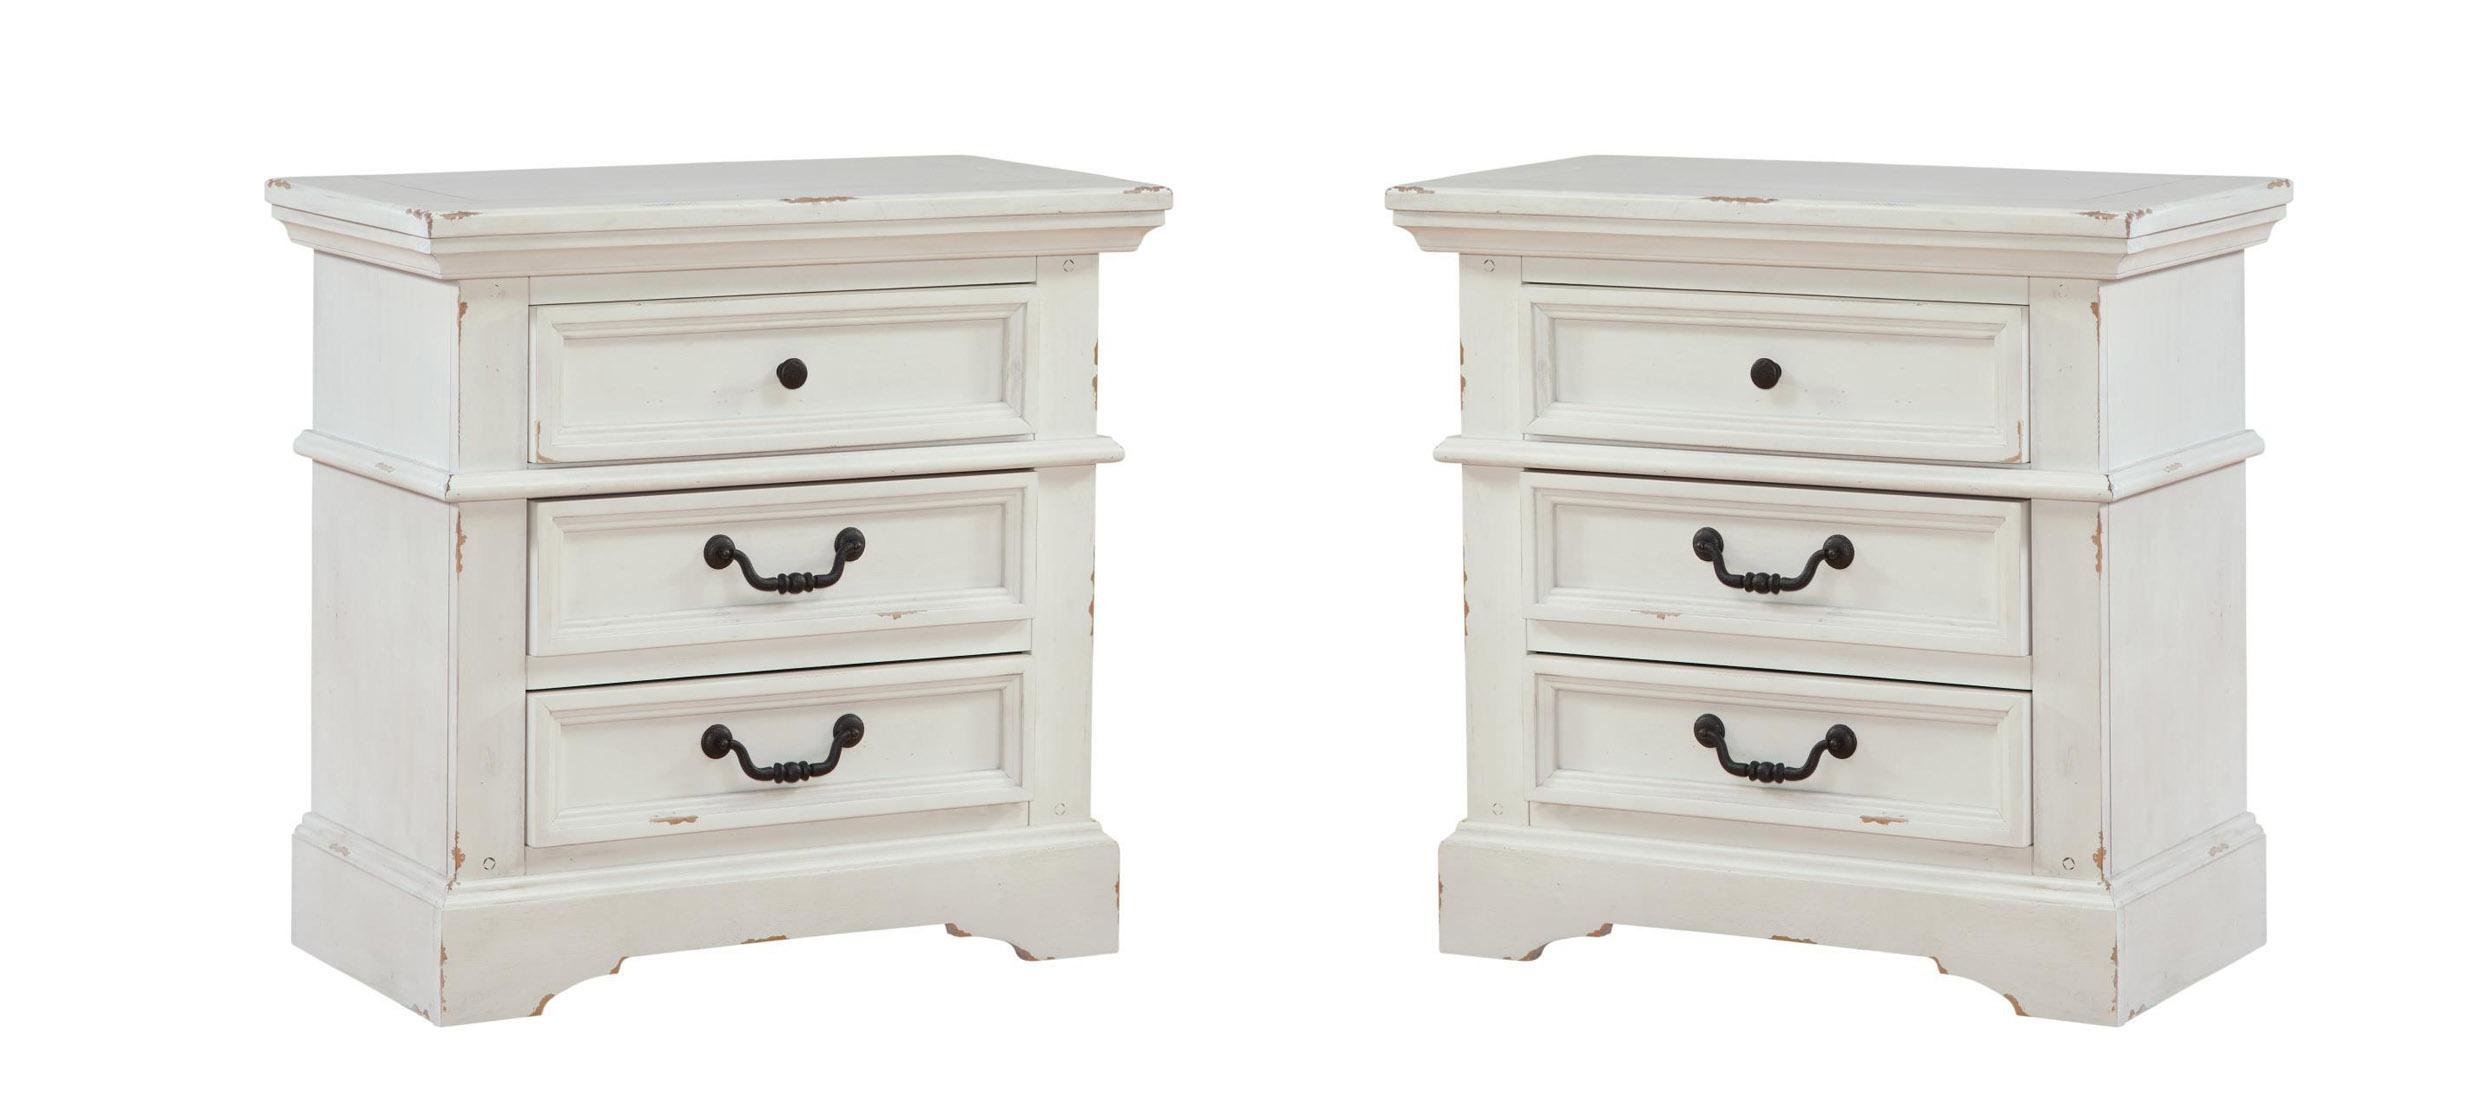 Classic, Traditional Nightstand Set 7810 STONEBROOK 7810-430-Set-2 in Antique White 